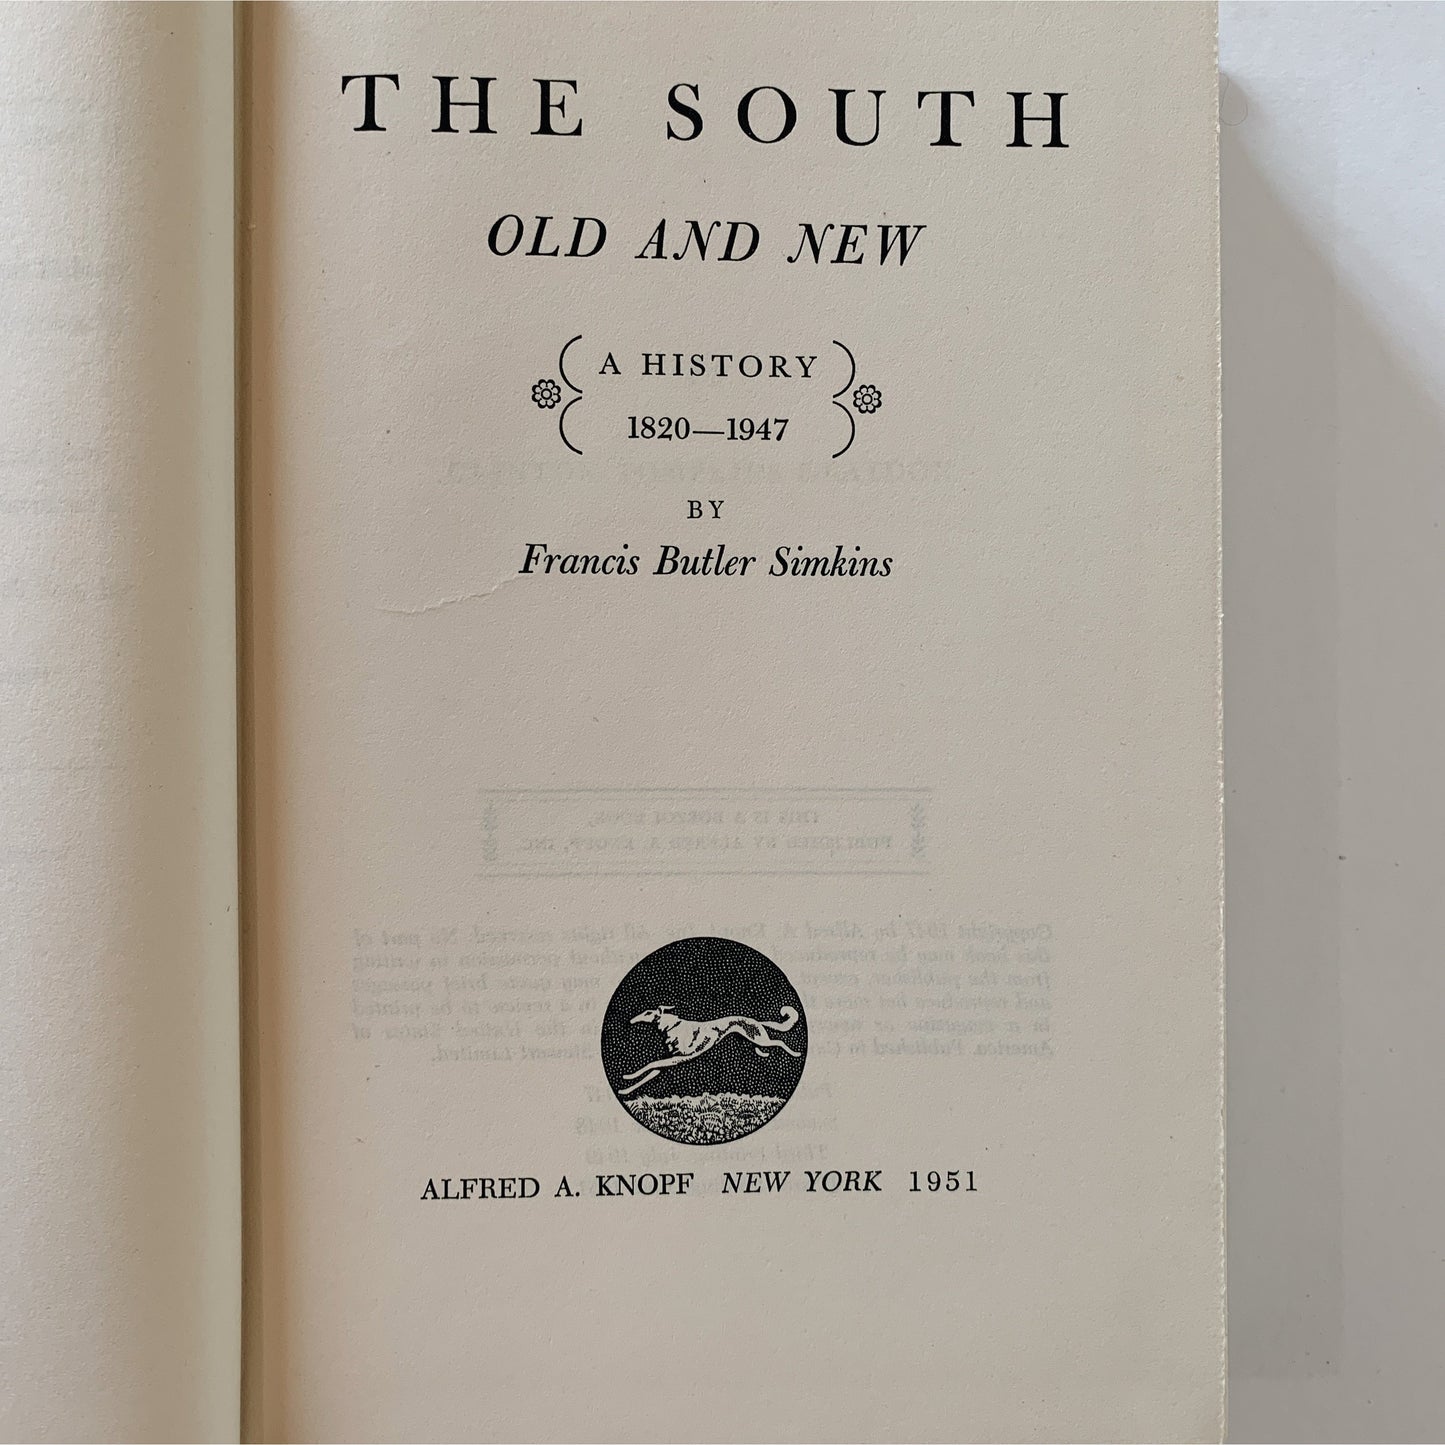 The South Old and New: A History 1820-1947, Francis Butler Simkins